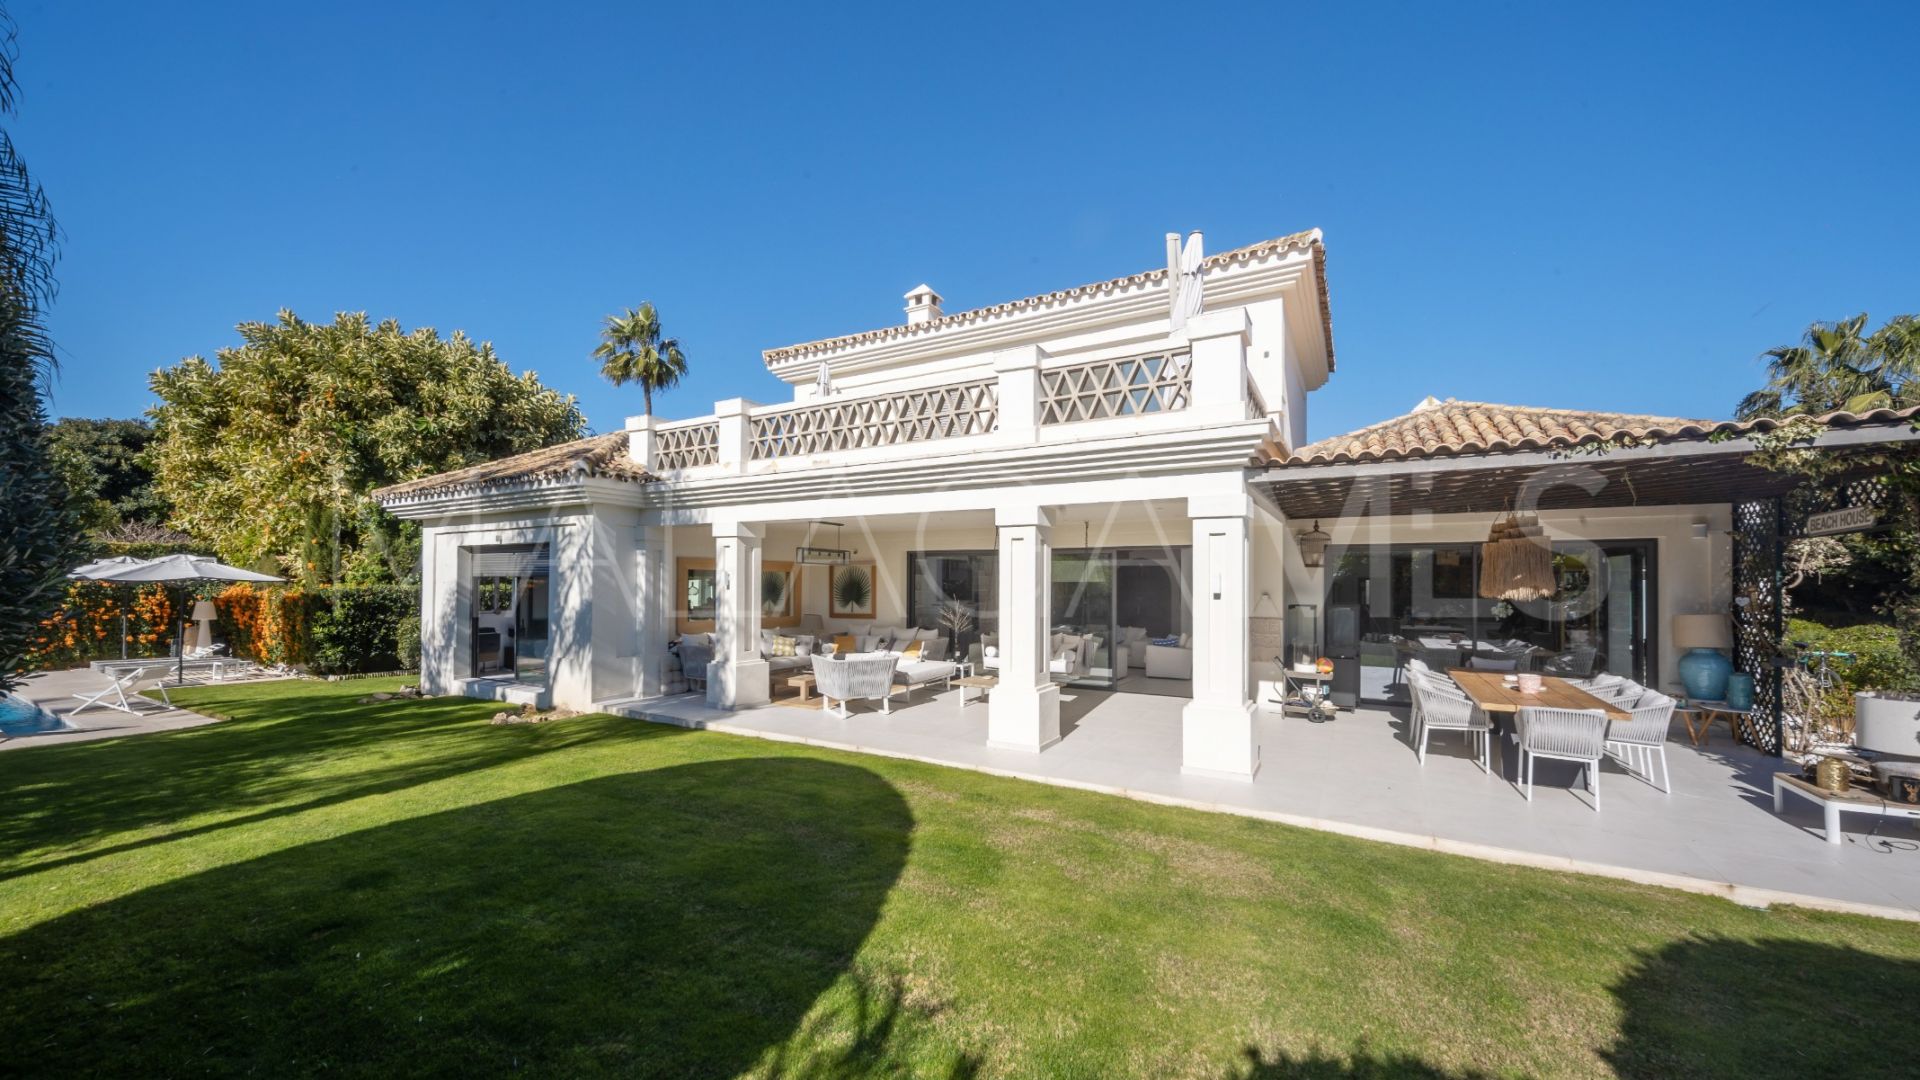 Villa for sale with 5 bedrooms in Casasola